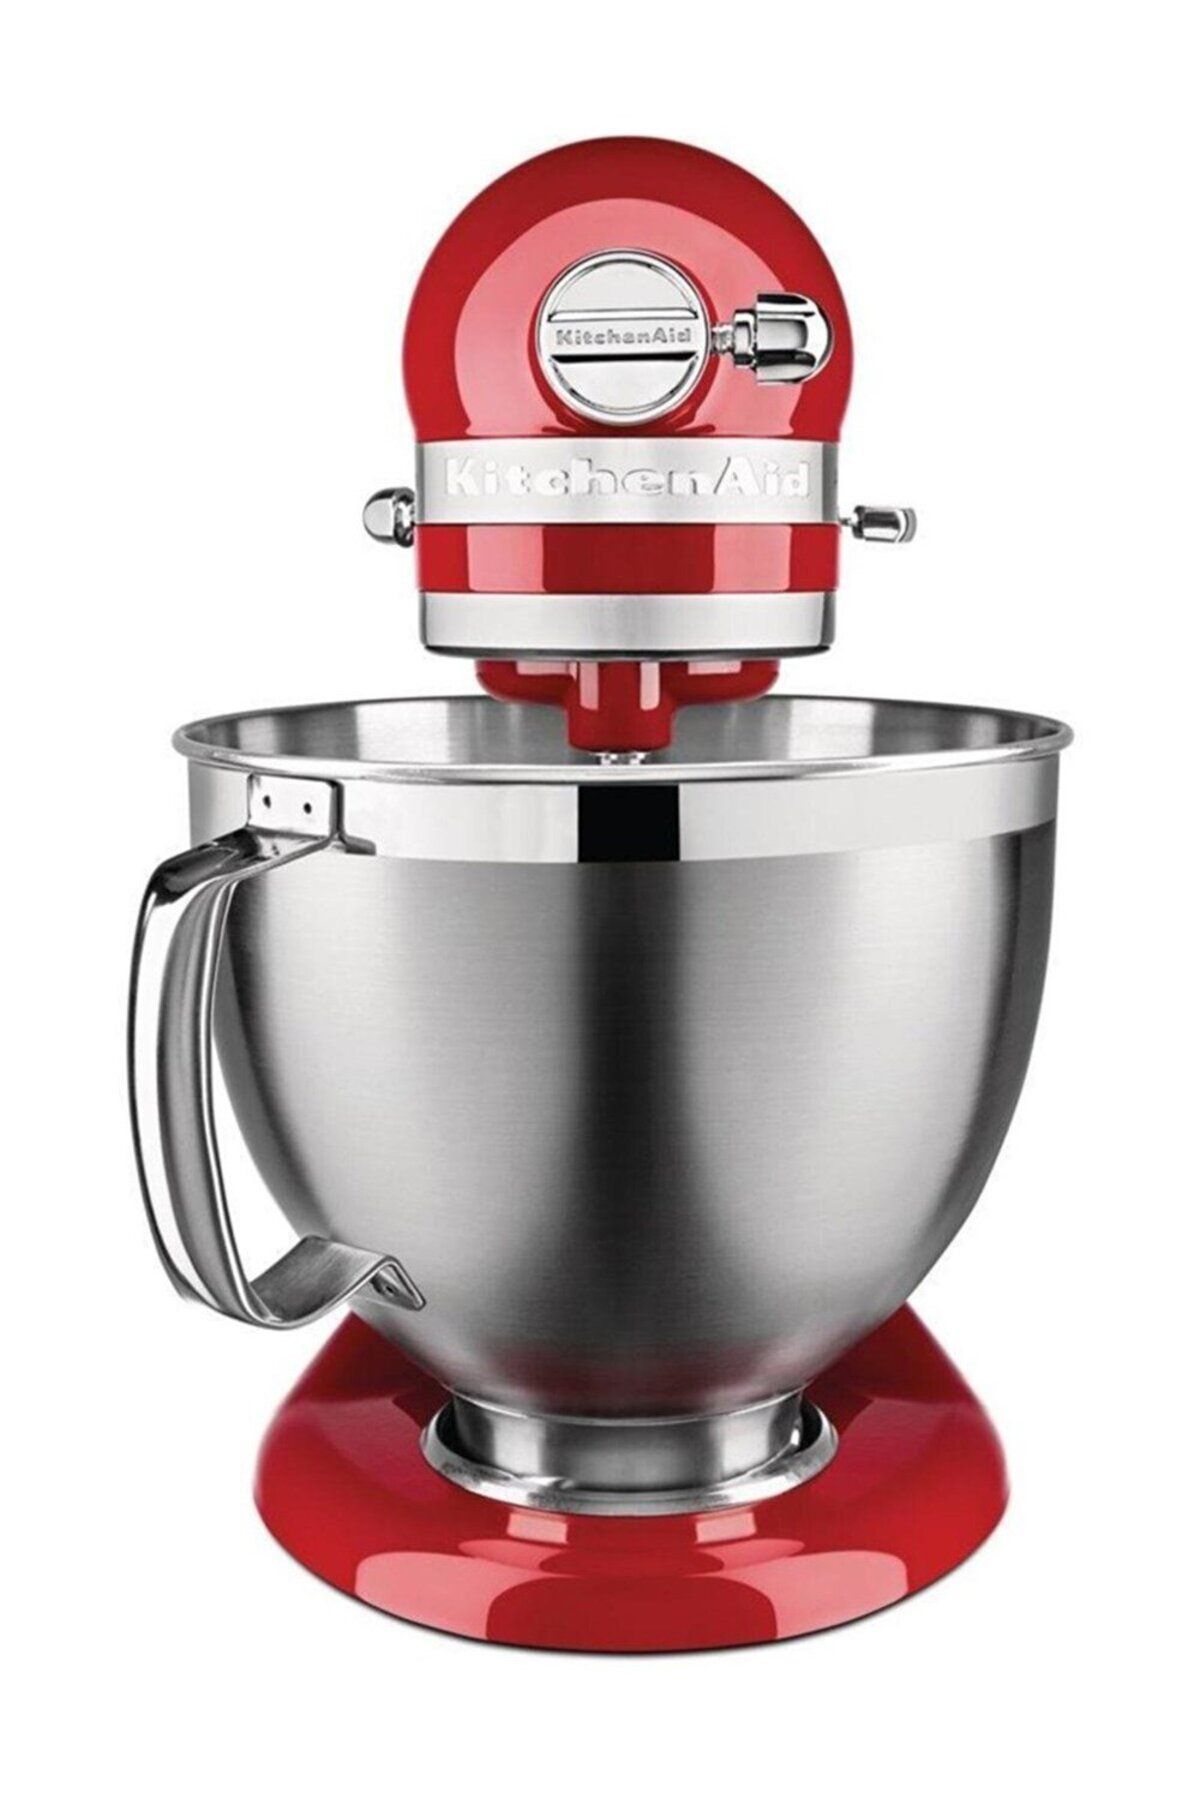 Kitchenaid Artisan Stand Mikser 4,8 L 5ksm185ps Empire Red-eer